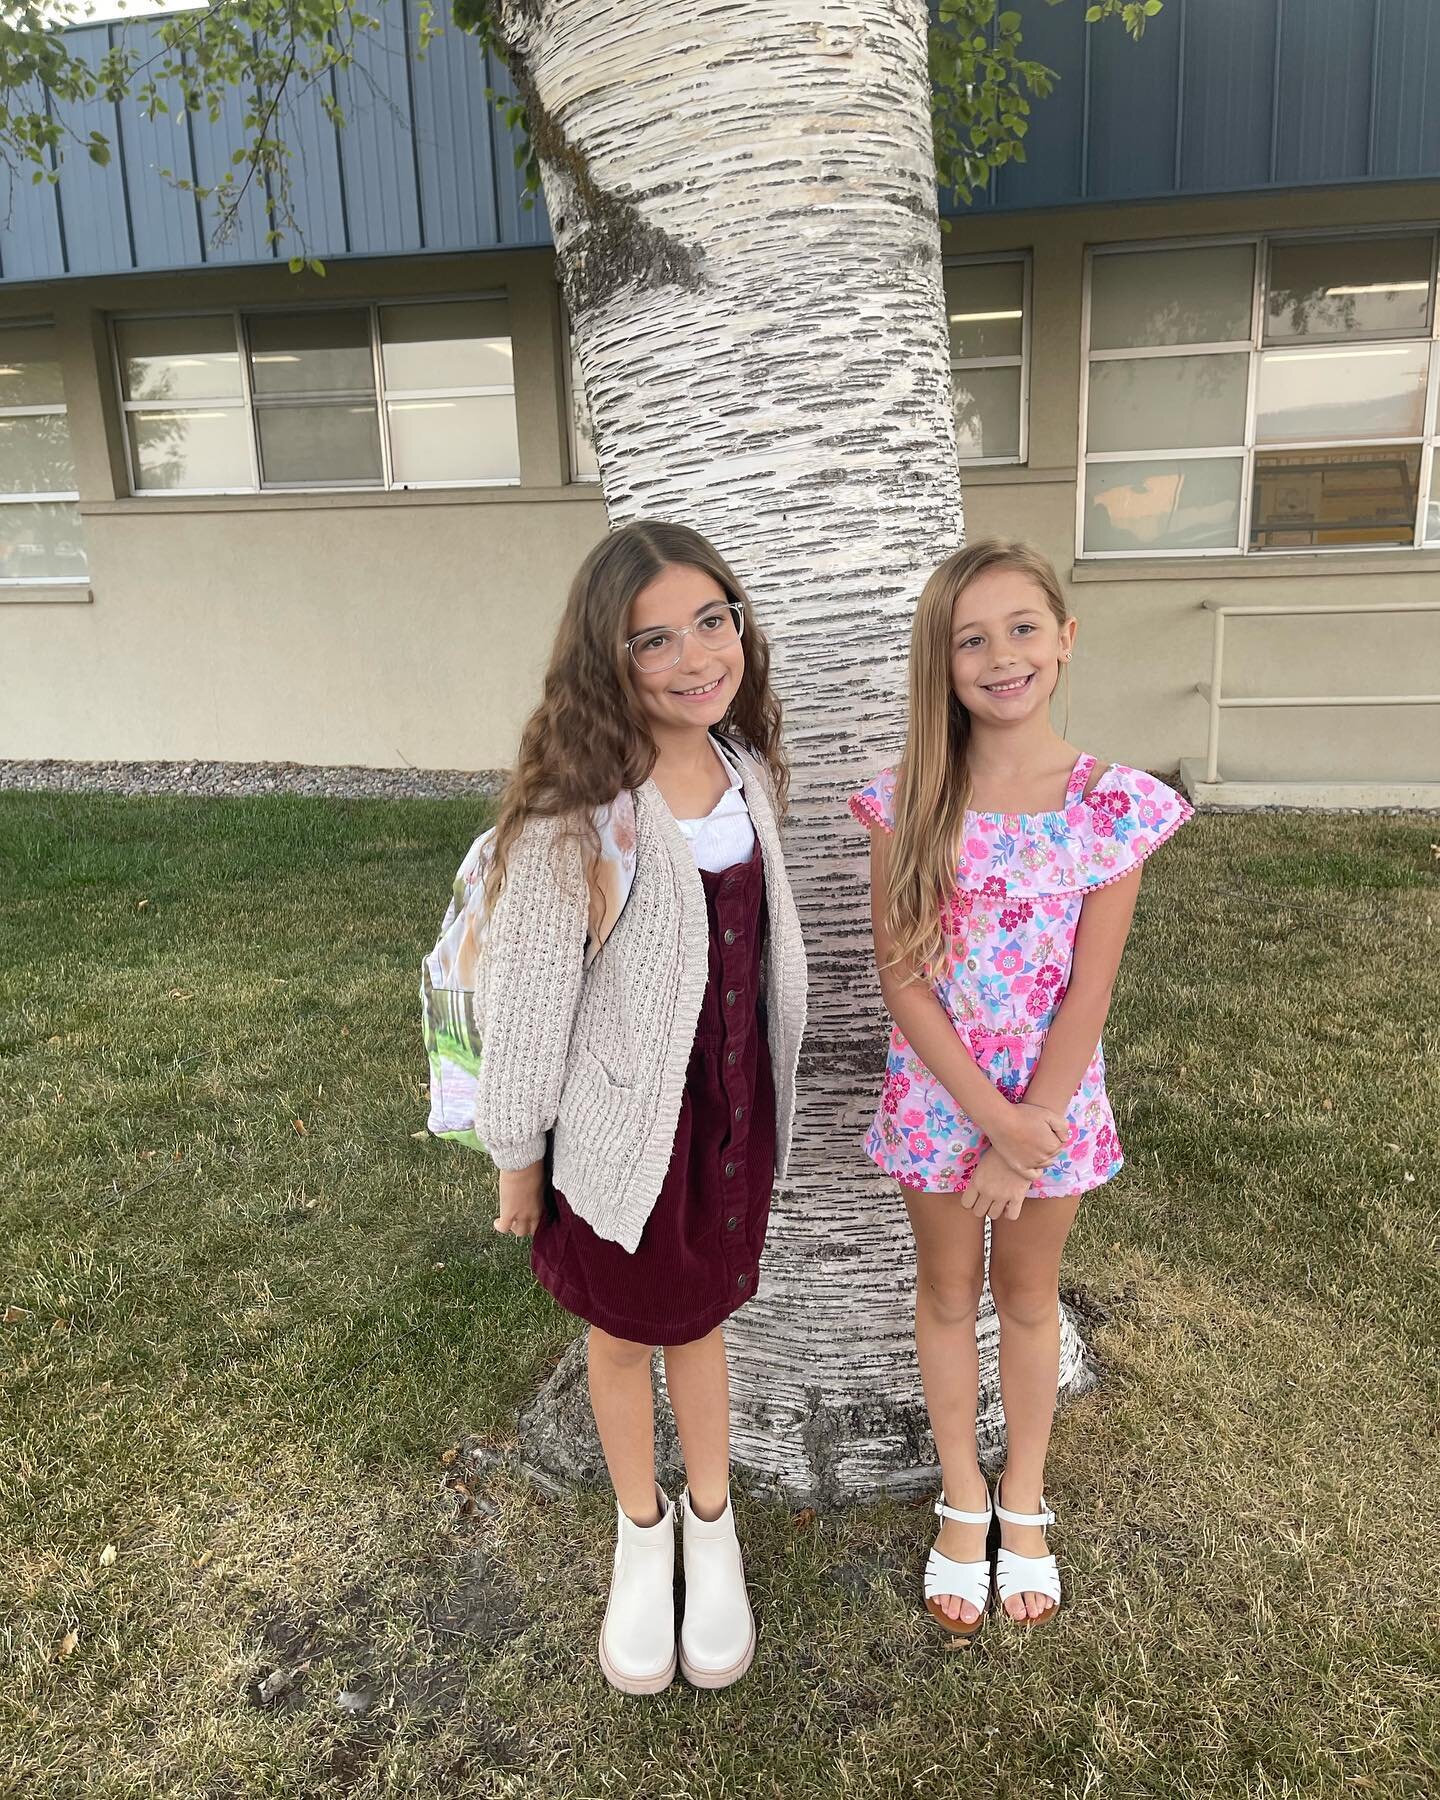 Proud of my girls to start another year of School! 

Don&rsquo;t miss a moment - they go by fast 
#dadlife